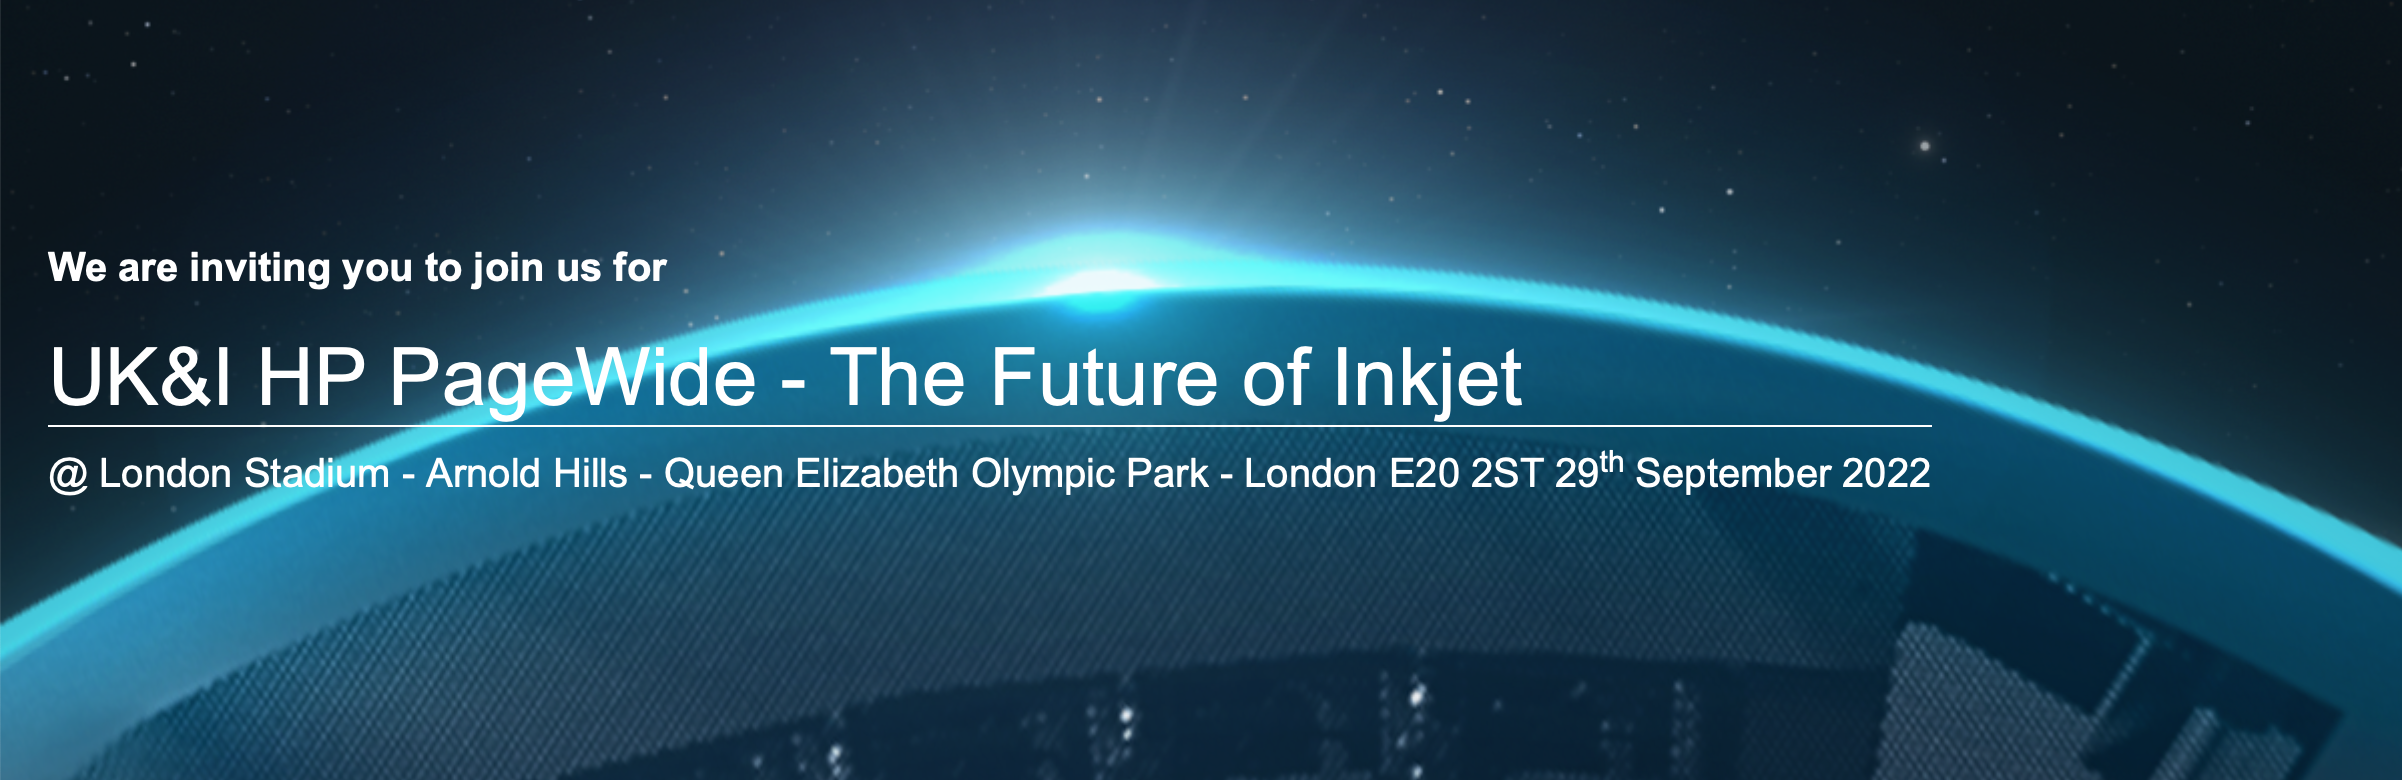 UK&I HP PageWide - The Future of Inkjet